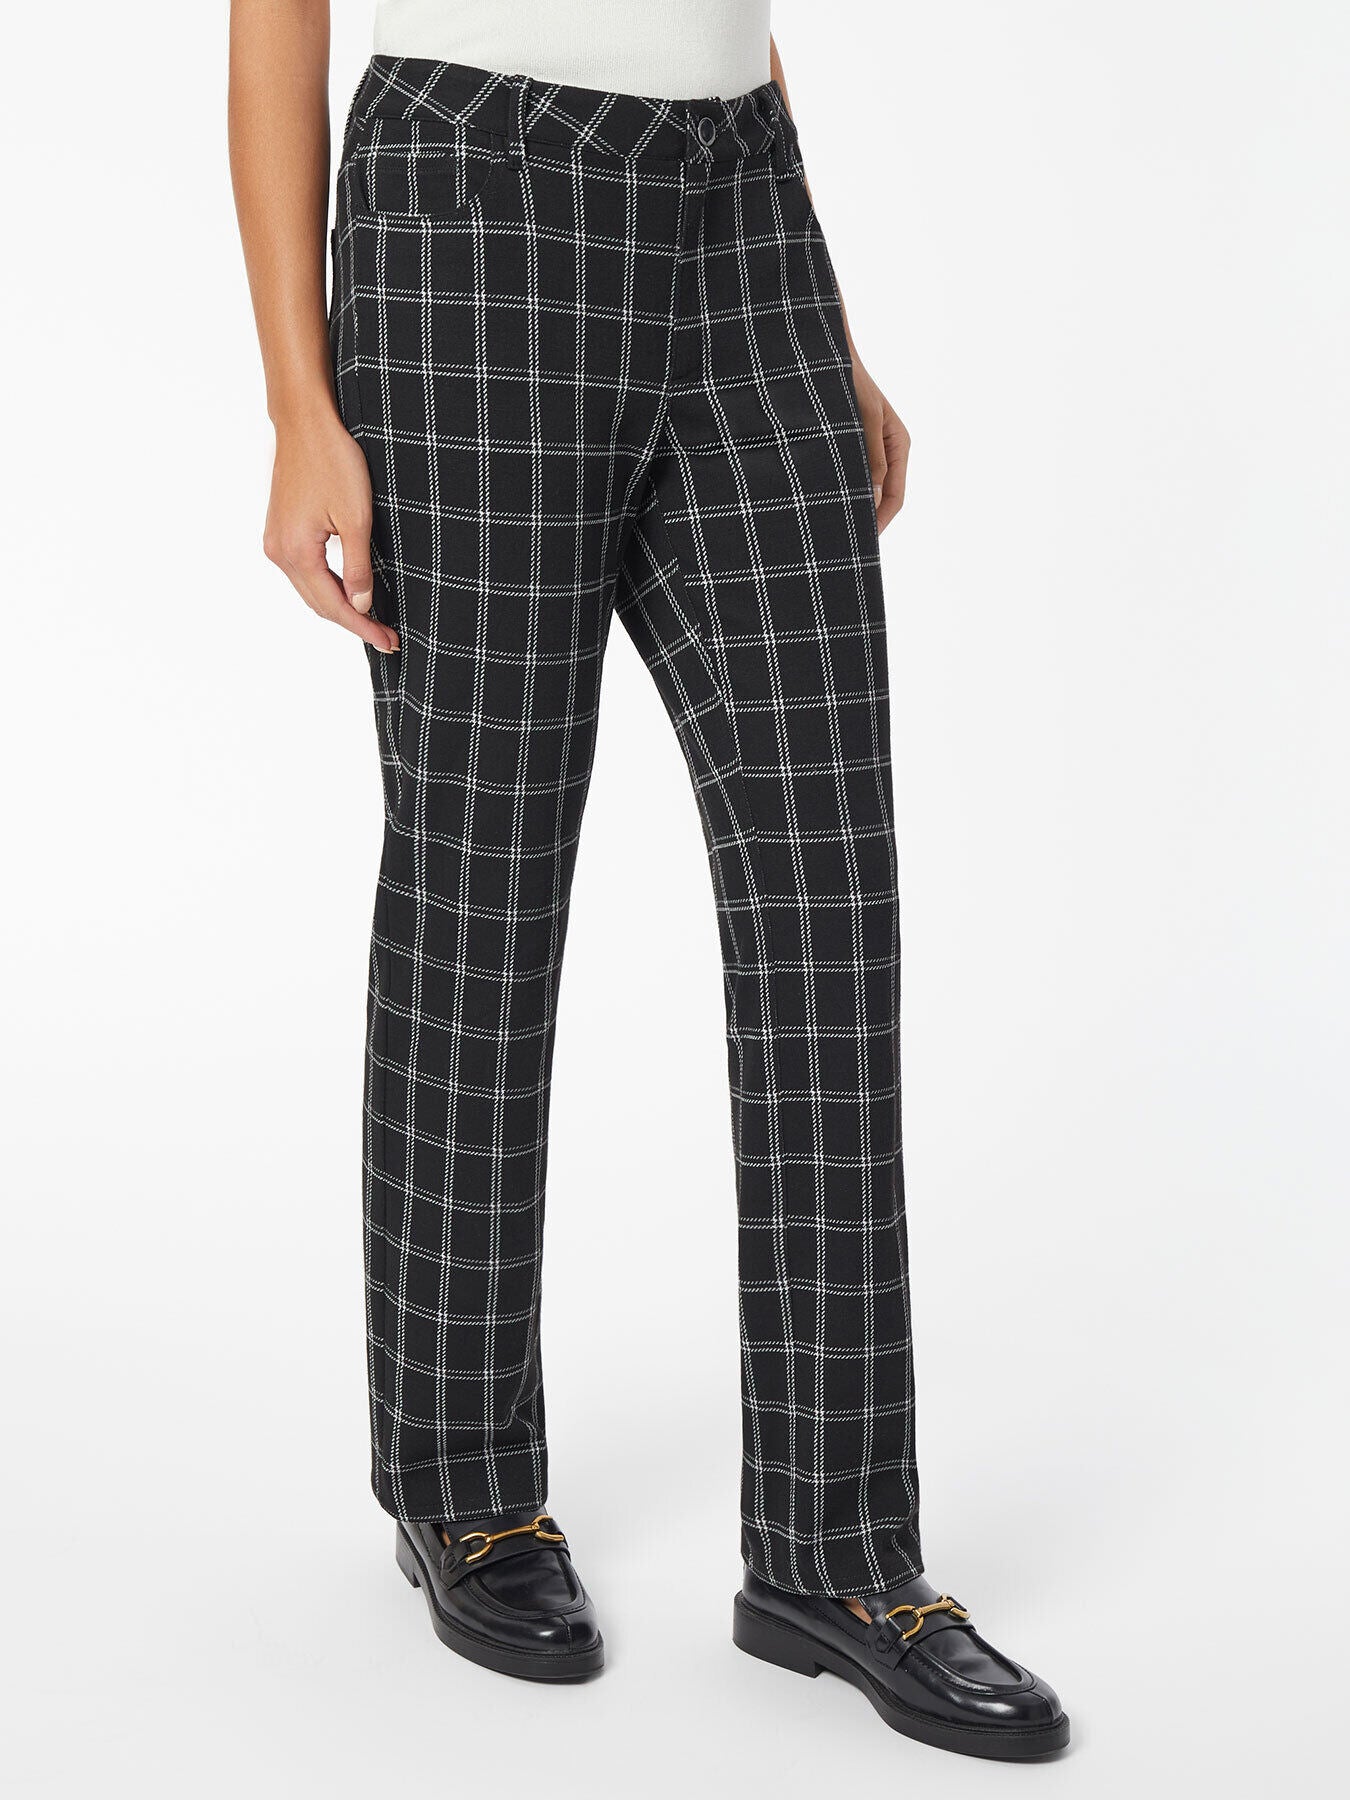 Amazon.com: Men's Black and White Checkerboard Print Chef Pants with  Elastic Waist Drawstring Baggy Chef Uniforms BigPlaid S: Clothing, Shoes &  Jewelry